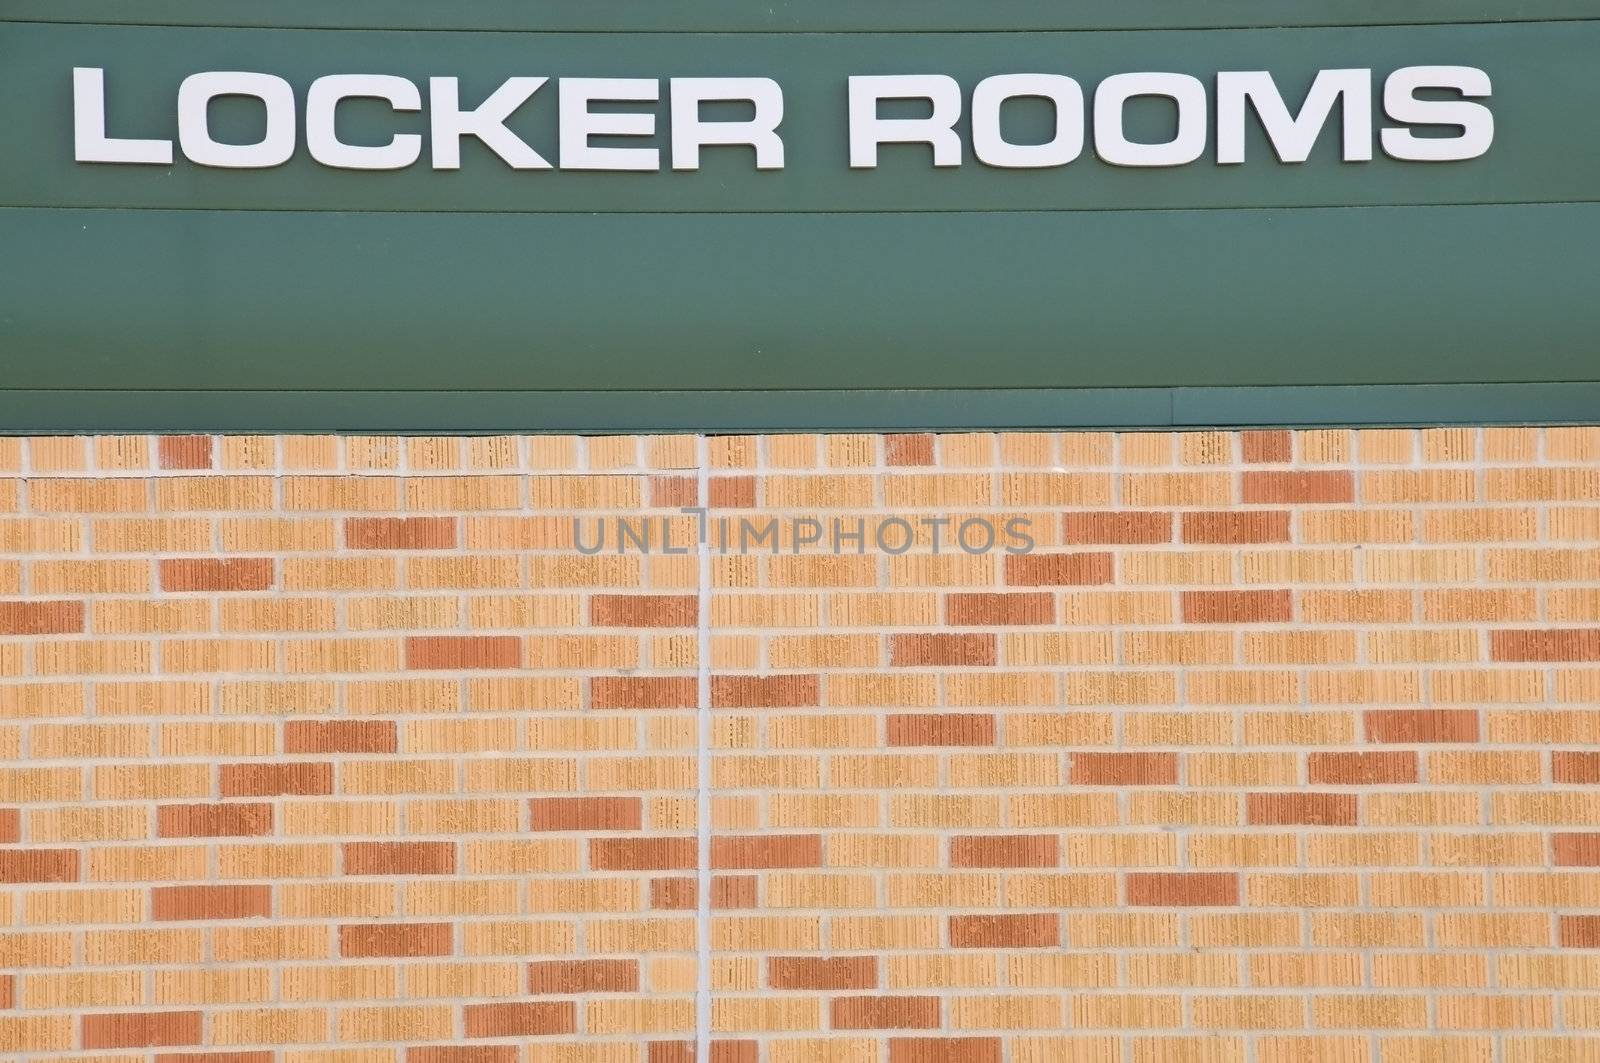 Locker Rooms by PDImages